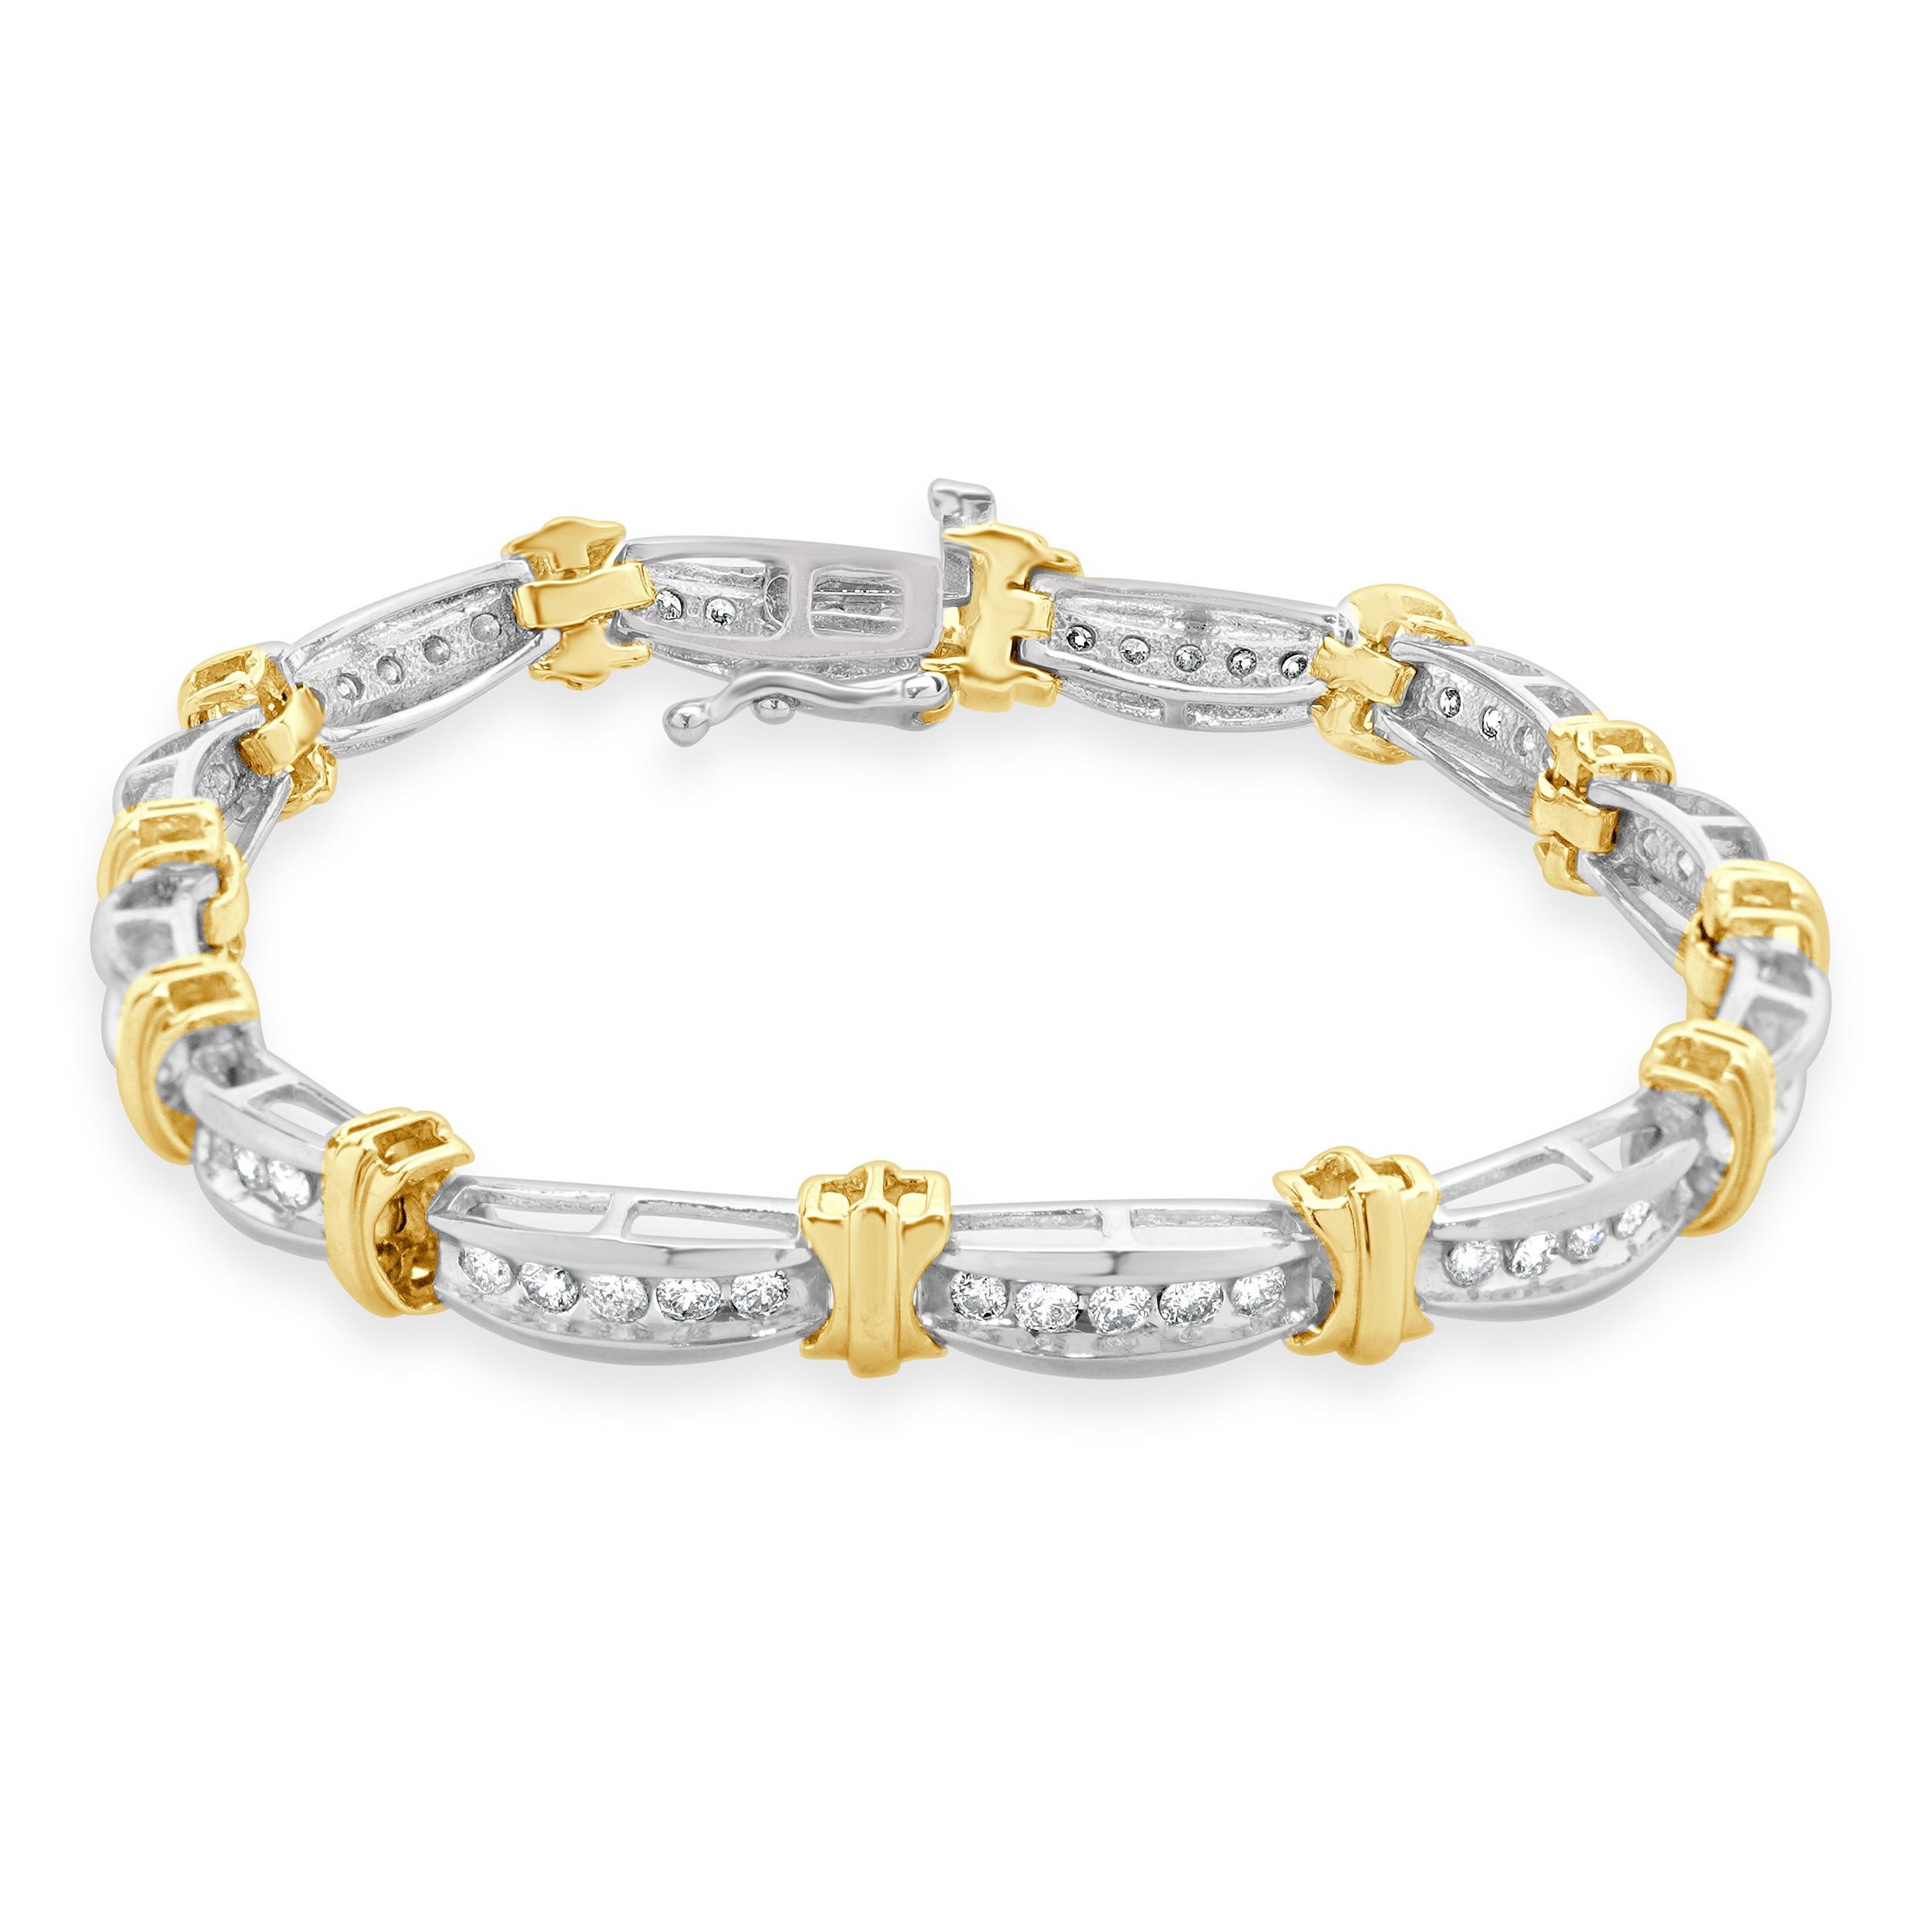 Designer: custom
Material: 10K white & yellow gold
Diamond: 60 round brilliant cut = 1.50cttw
Color: H
Clarity: I1
Dimensions: bracelet will fit up to a 7.25-inch wrist
Weight: 13.86 grams
